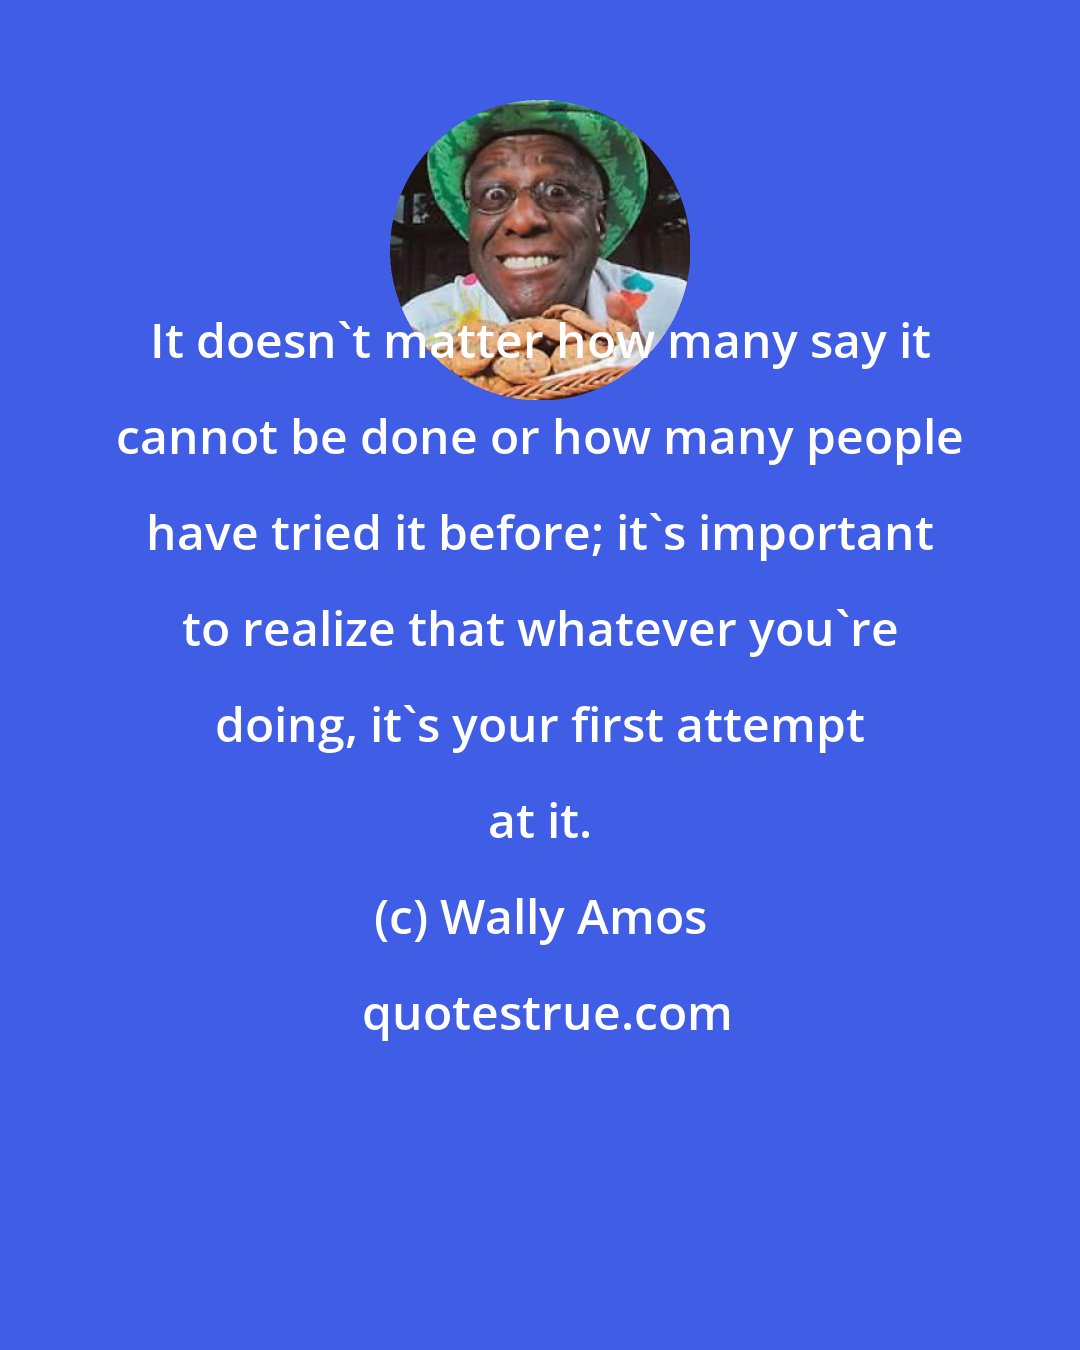 Wally Amos: It doesn't matter how many say it cannot be done or how many people have tried it before; it's important to realize that whatever you're doing, it's your first attempt at it.